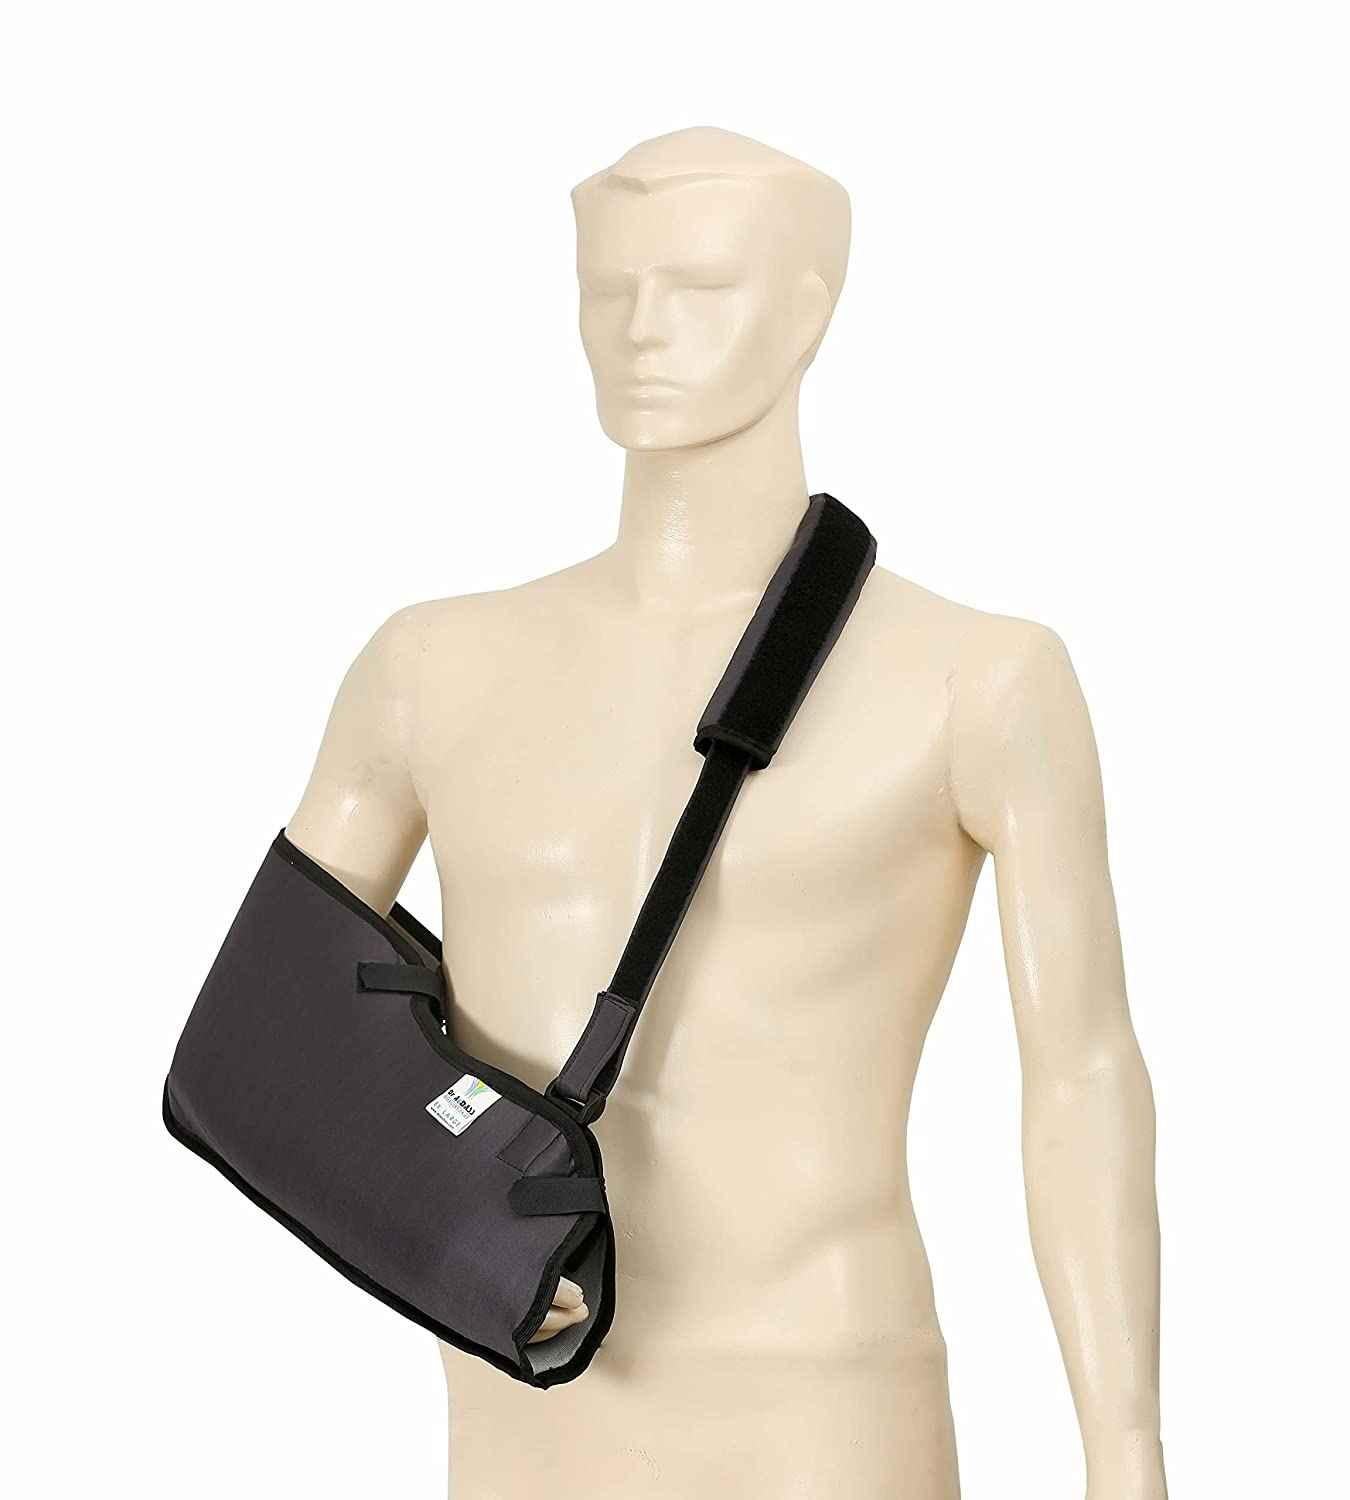 Arm sling, Arm sling Pouch, Adjustable Arm sling, Adjustable Arm slings  Manufacturers/Exporters in India